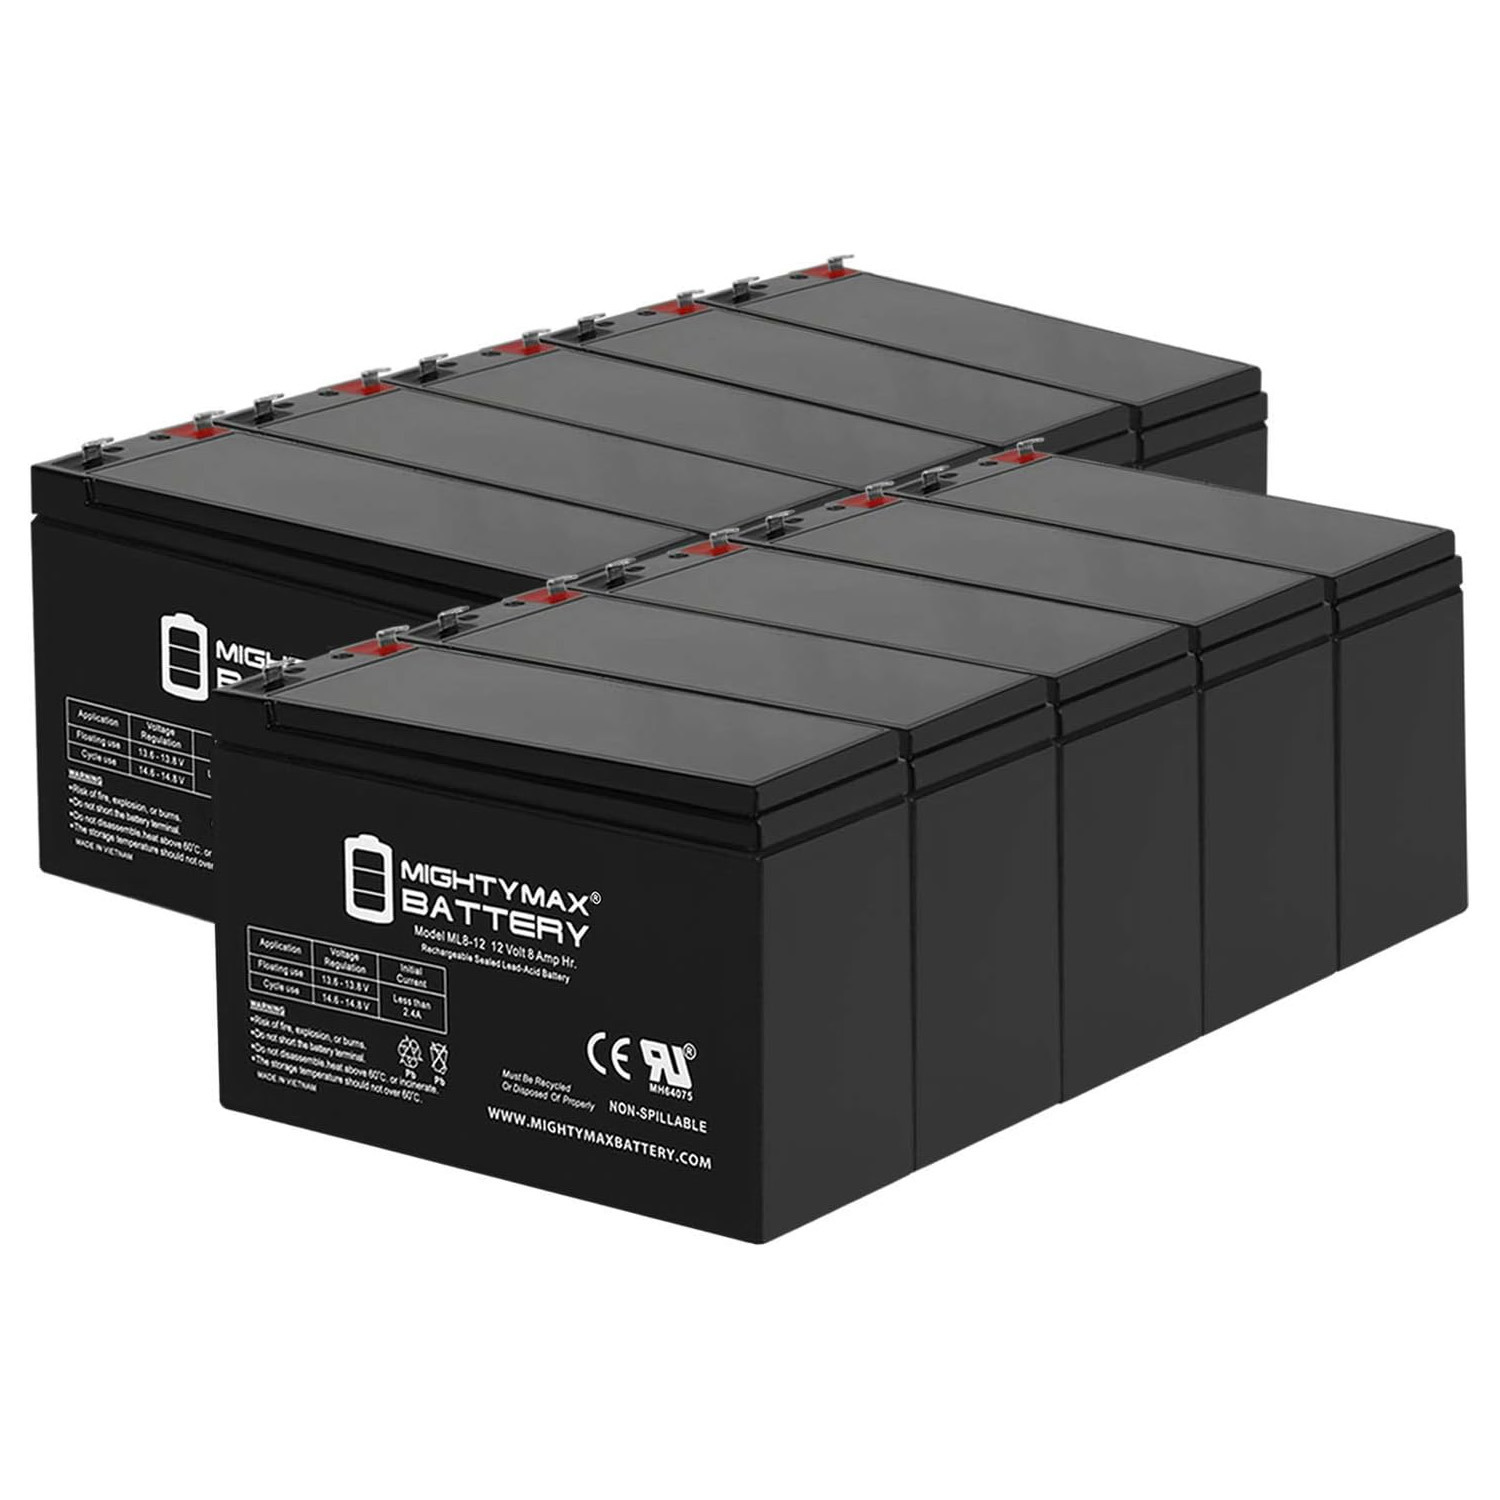 12V 8Ah Battery Replacement for Sola 310-750-A, B510-1250-E - 10 Pack